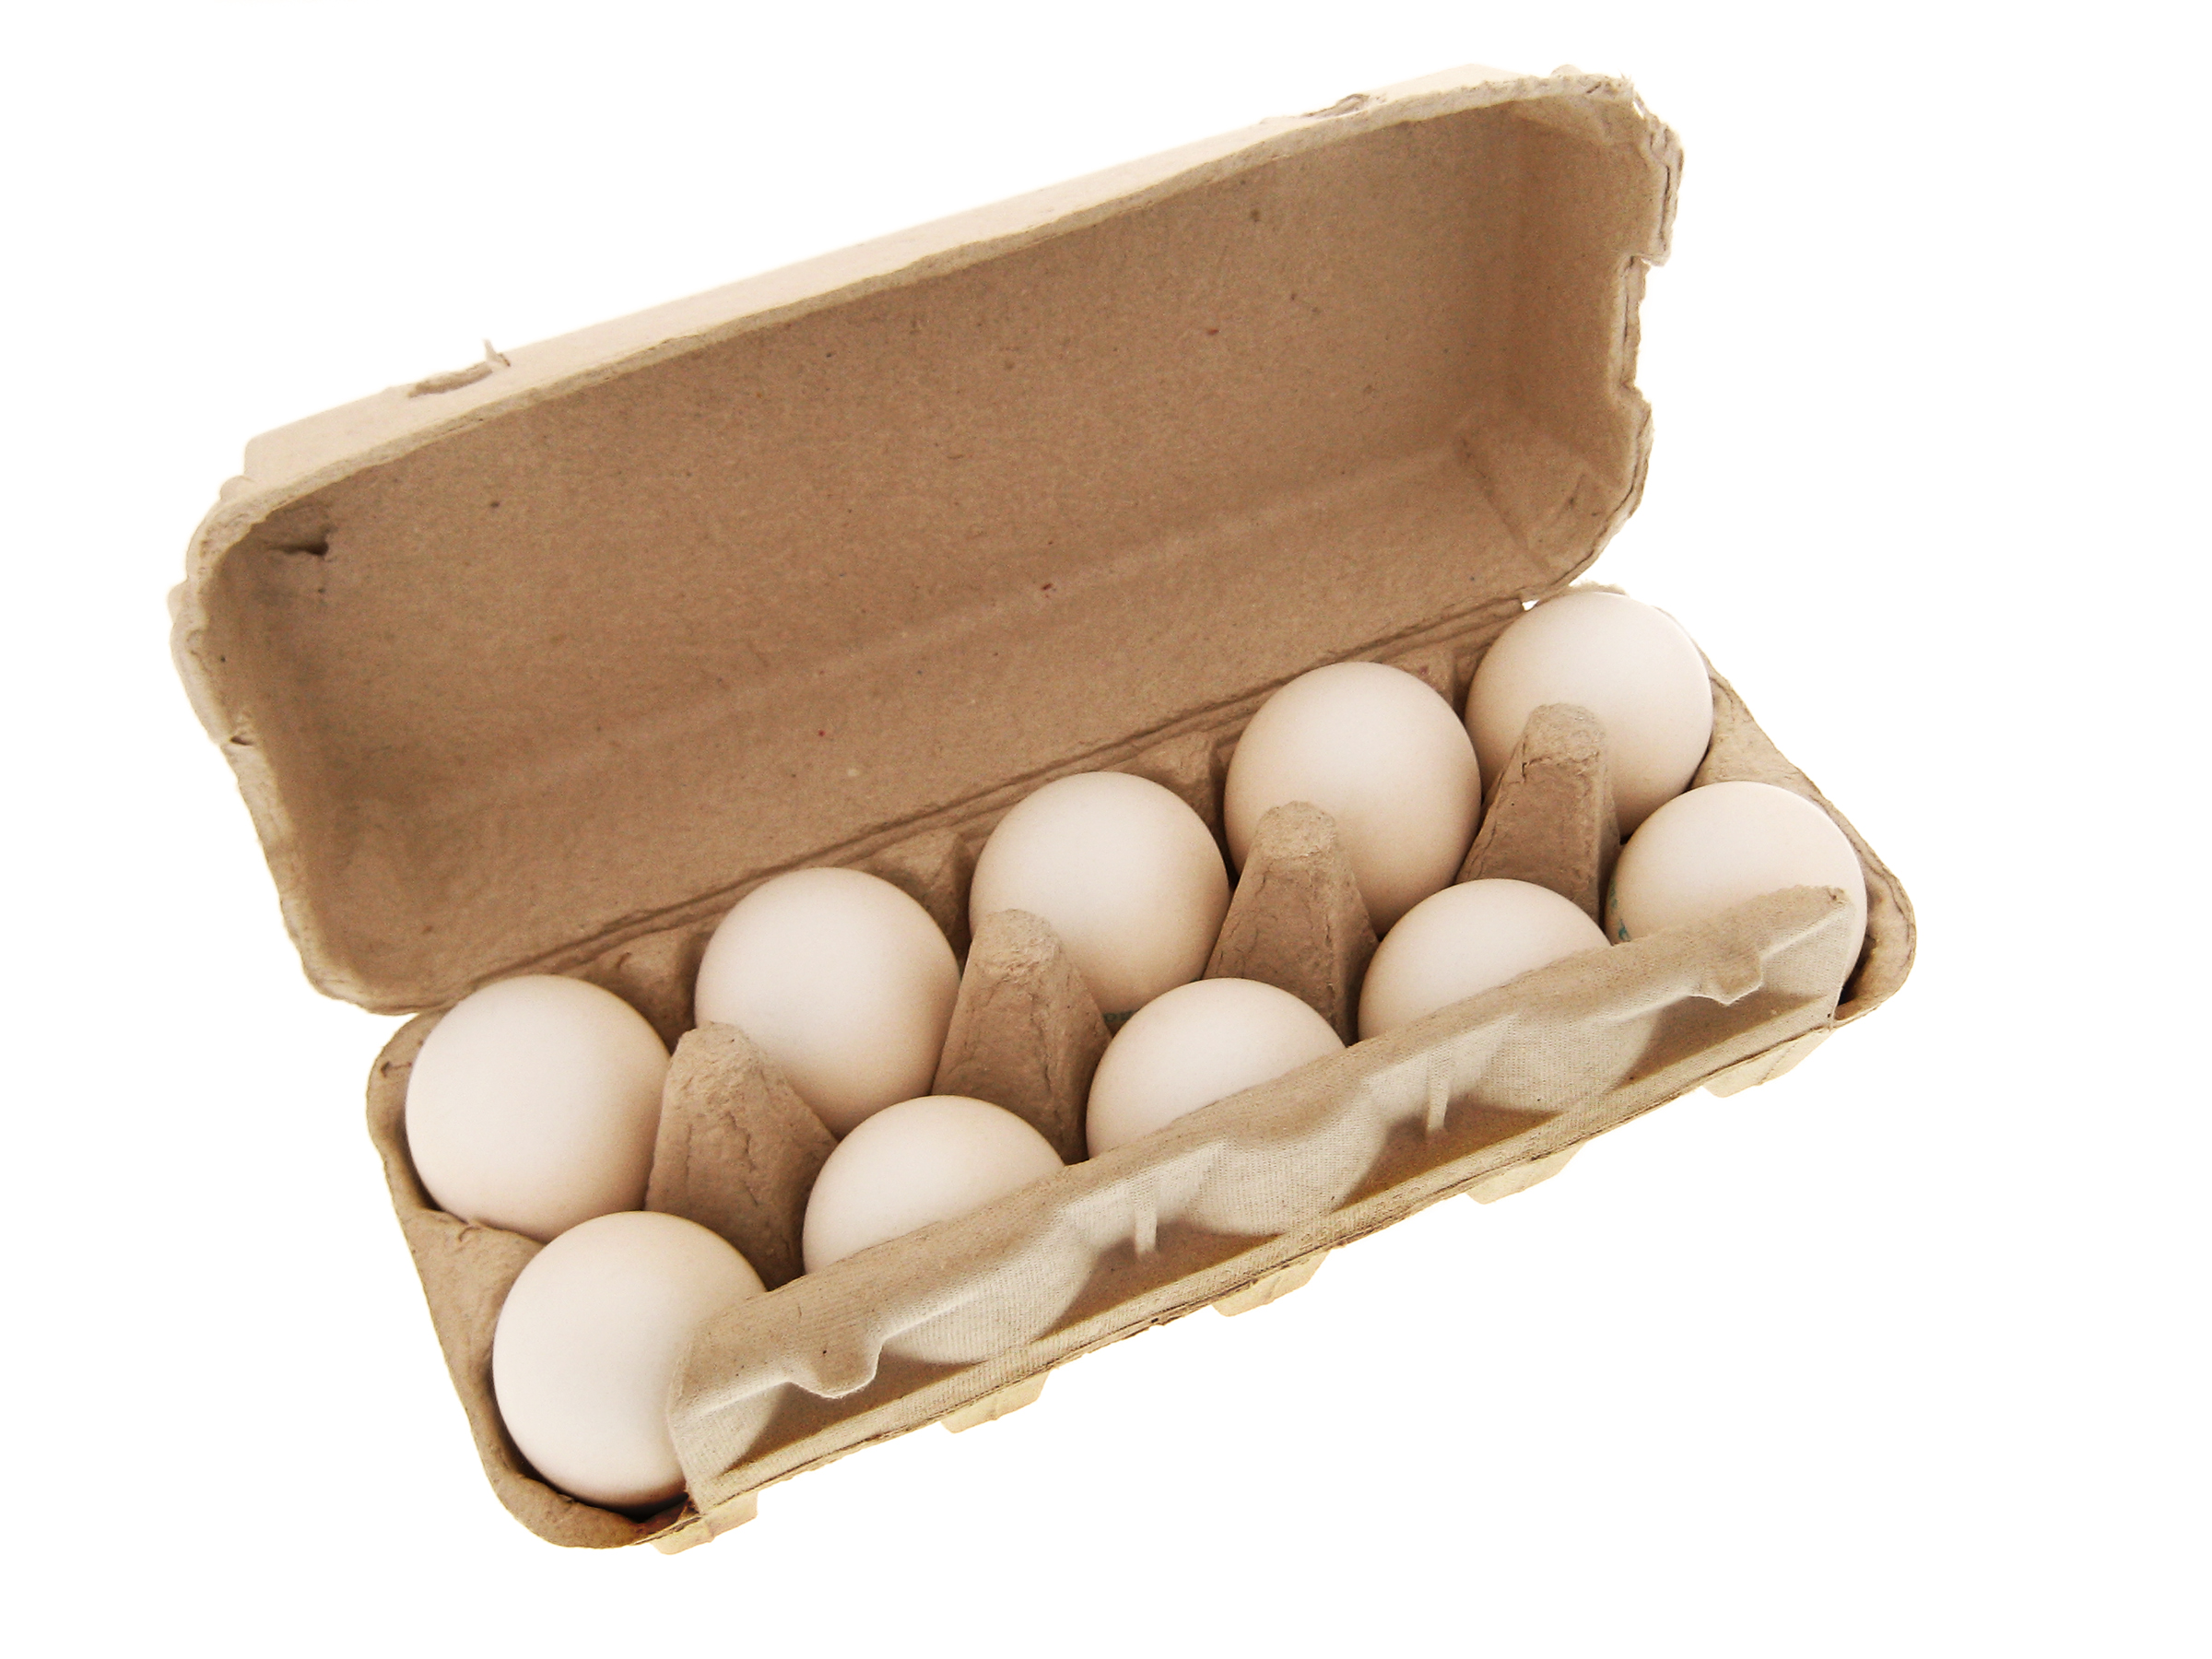 Eggs in box, Box, Packaging, Meal, Natural, HQ Photo